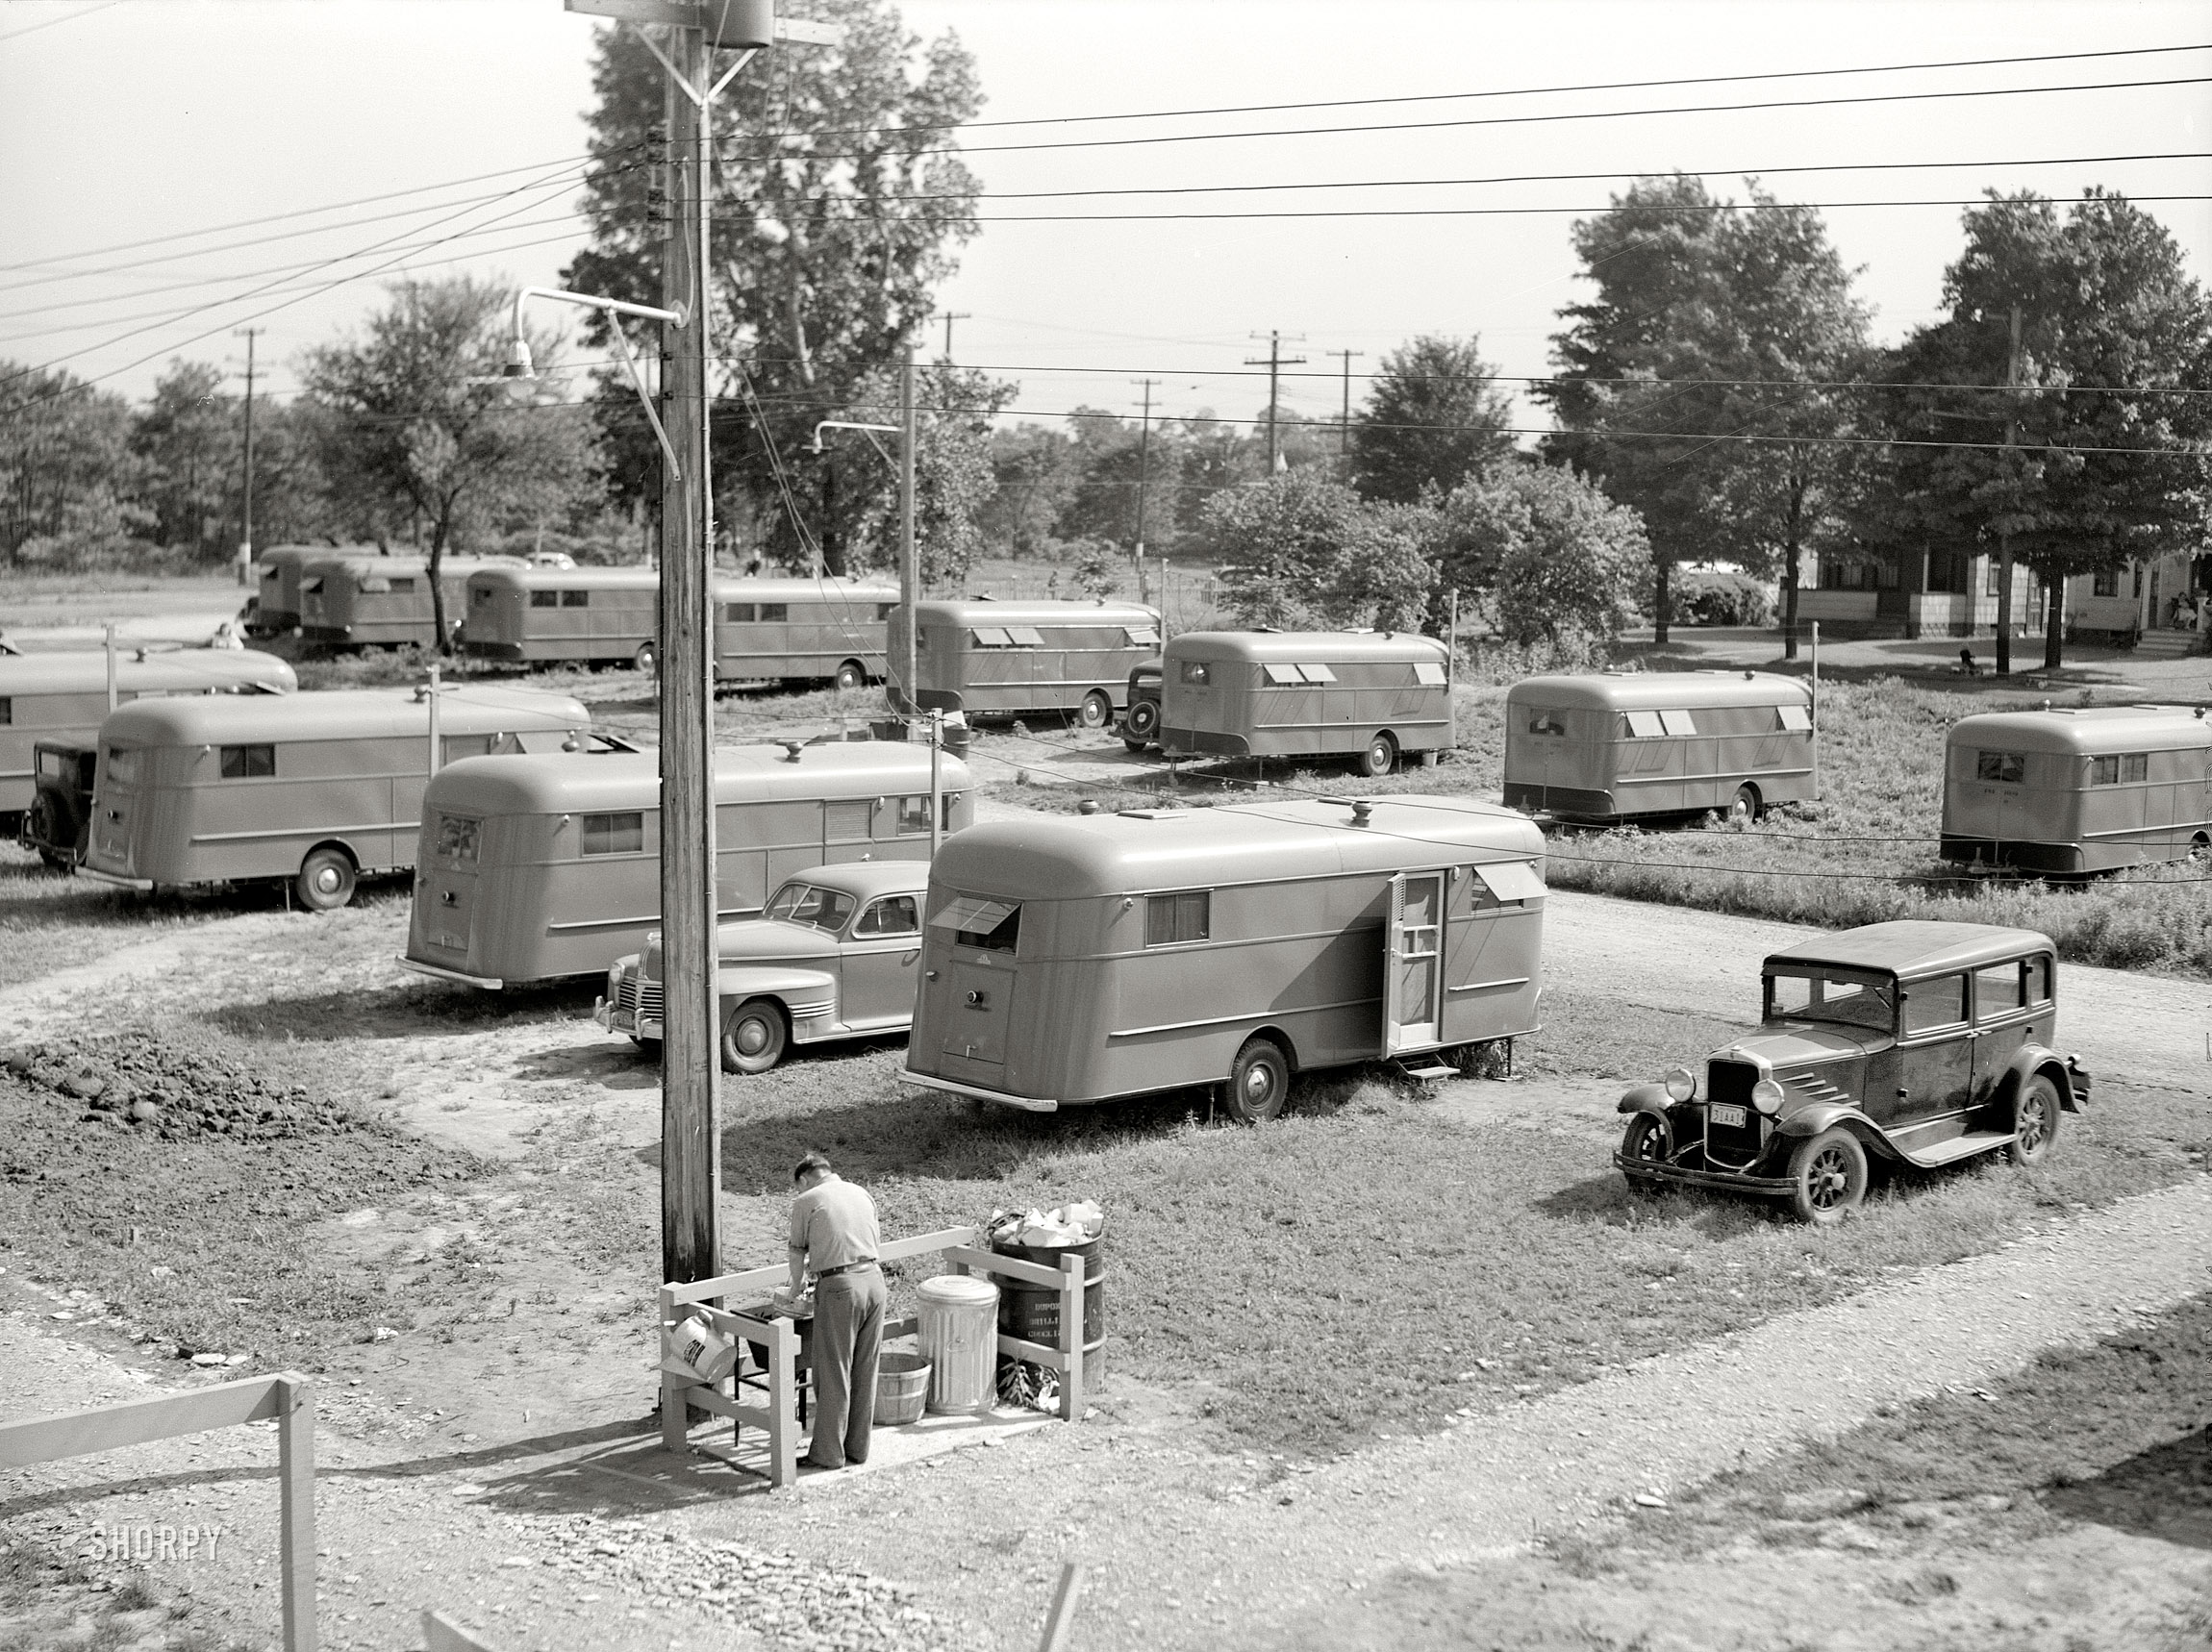 June 1941. Erie County, Pennsylvania. "Each group of ten trailers in the FSA camp at Erie has a trailer service unit, water faucet, slop sink, and garbage pail." Photo by John Vachon for the Farm Security Administration. View full size.